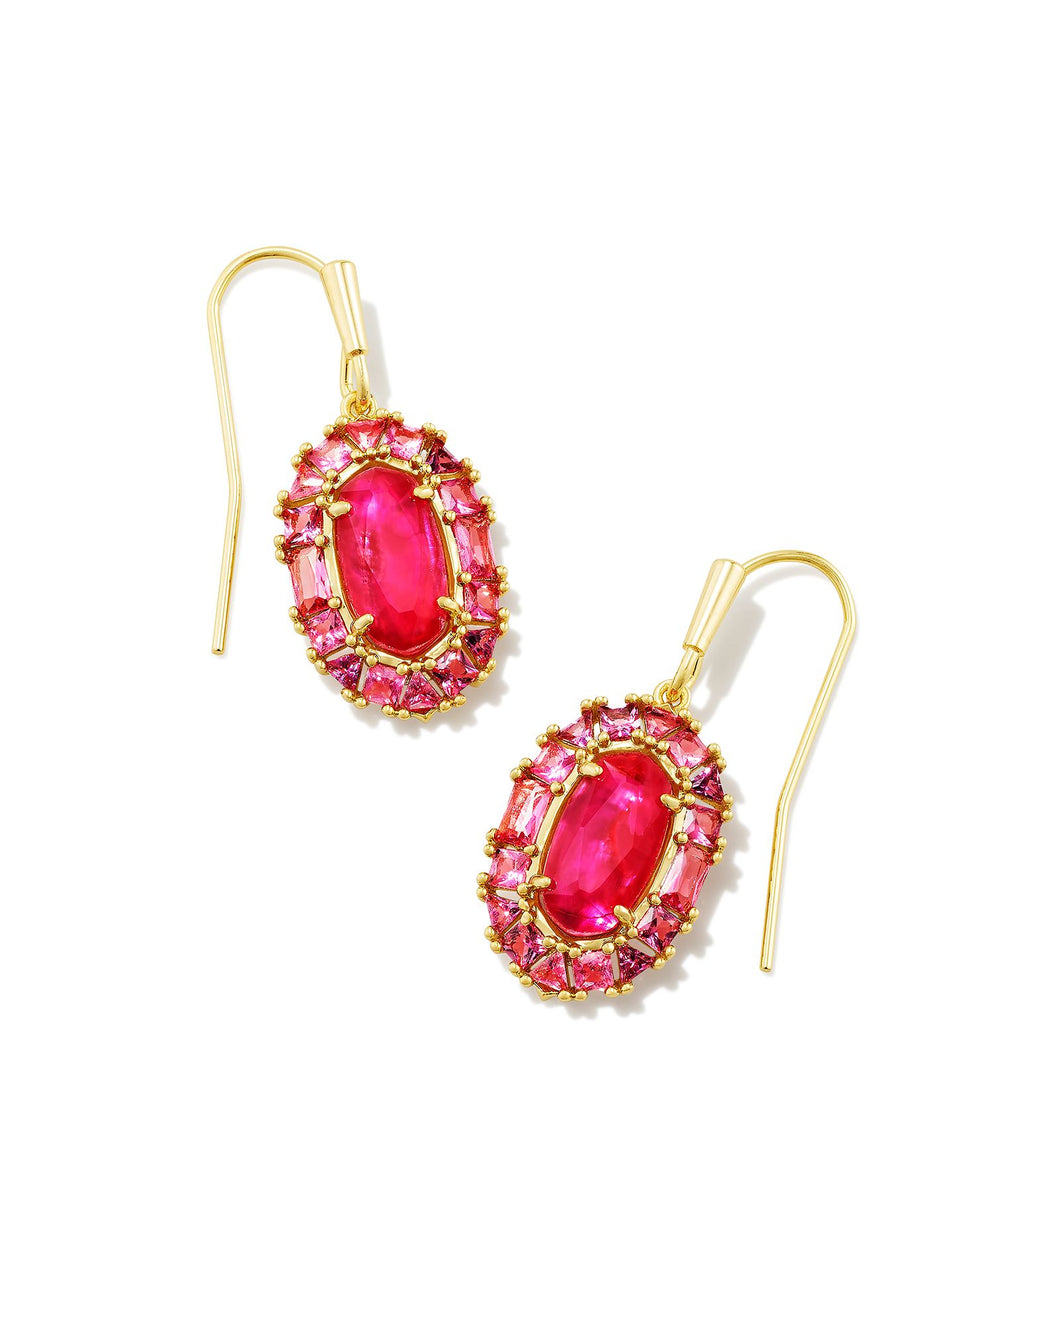 Lee Gold Crystal Frame Drop Earrings in Raspberry Illusion